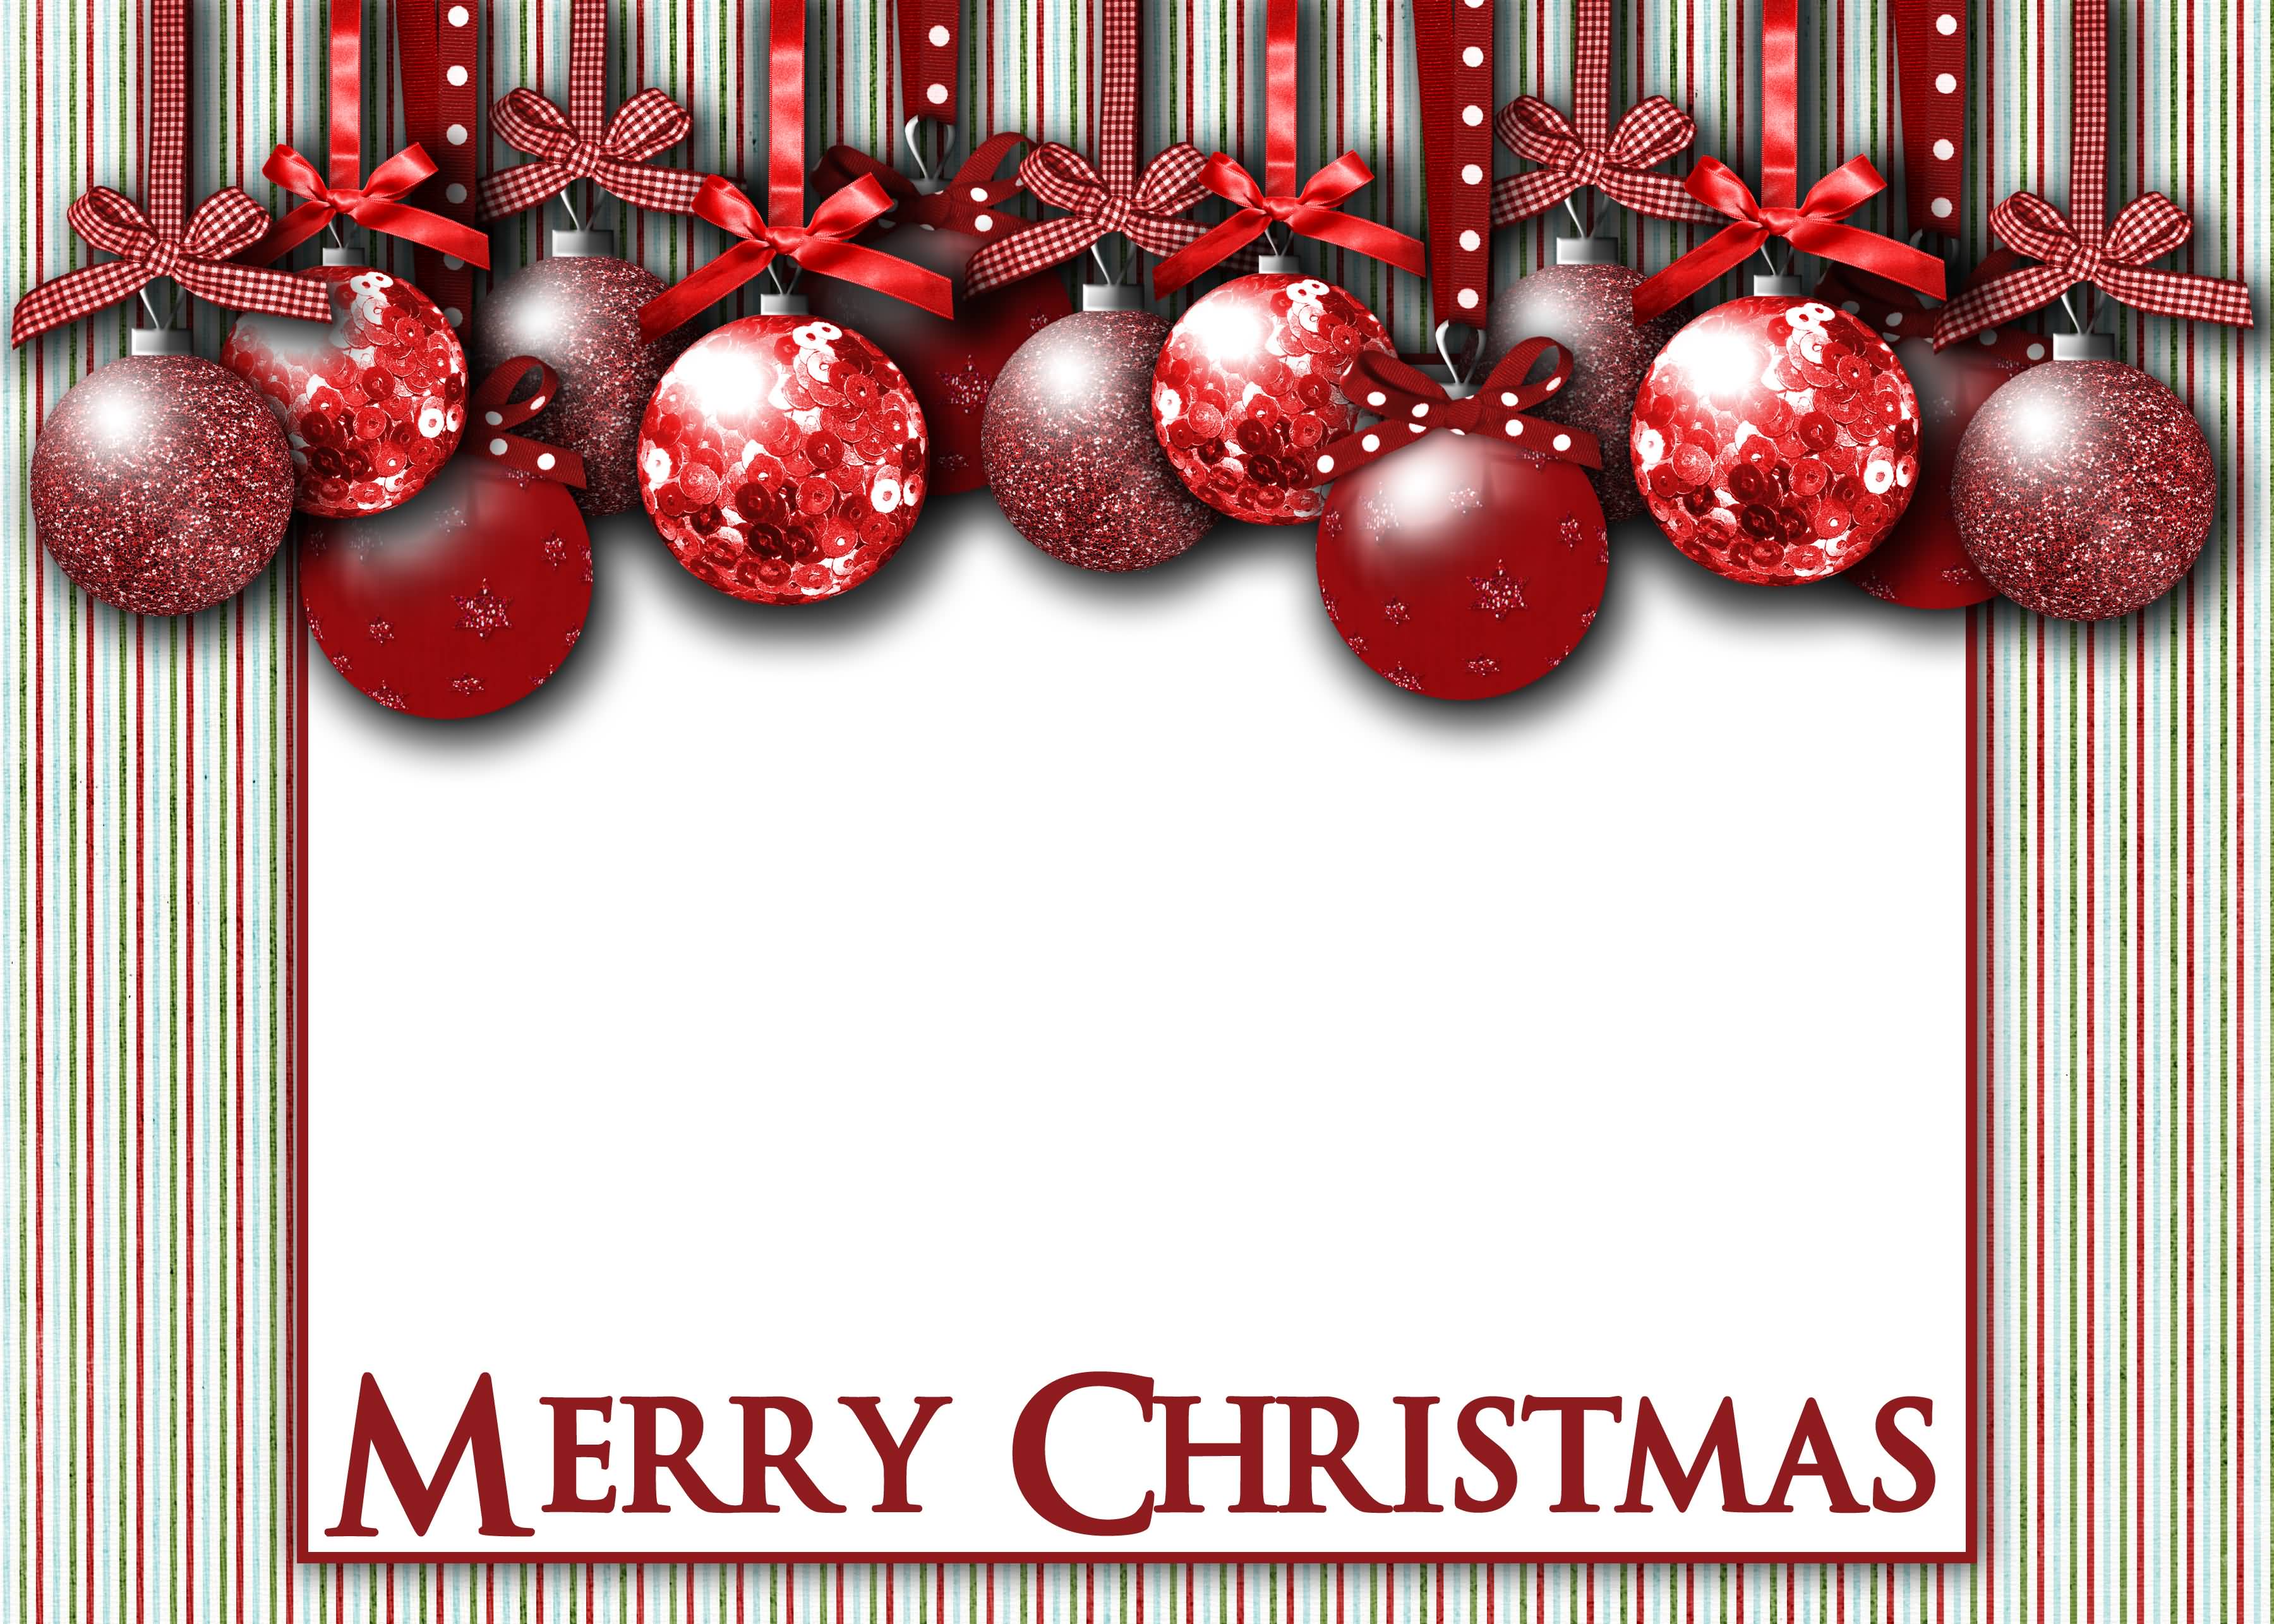 Merry Christmas Cards Template Image Picture Photo Wallpaper 14